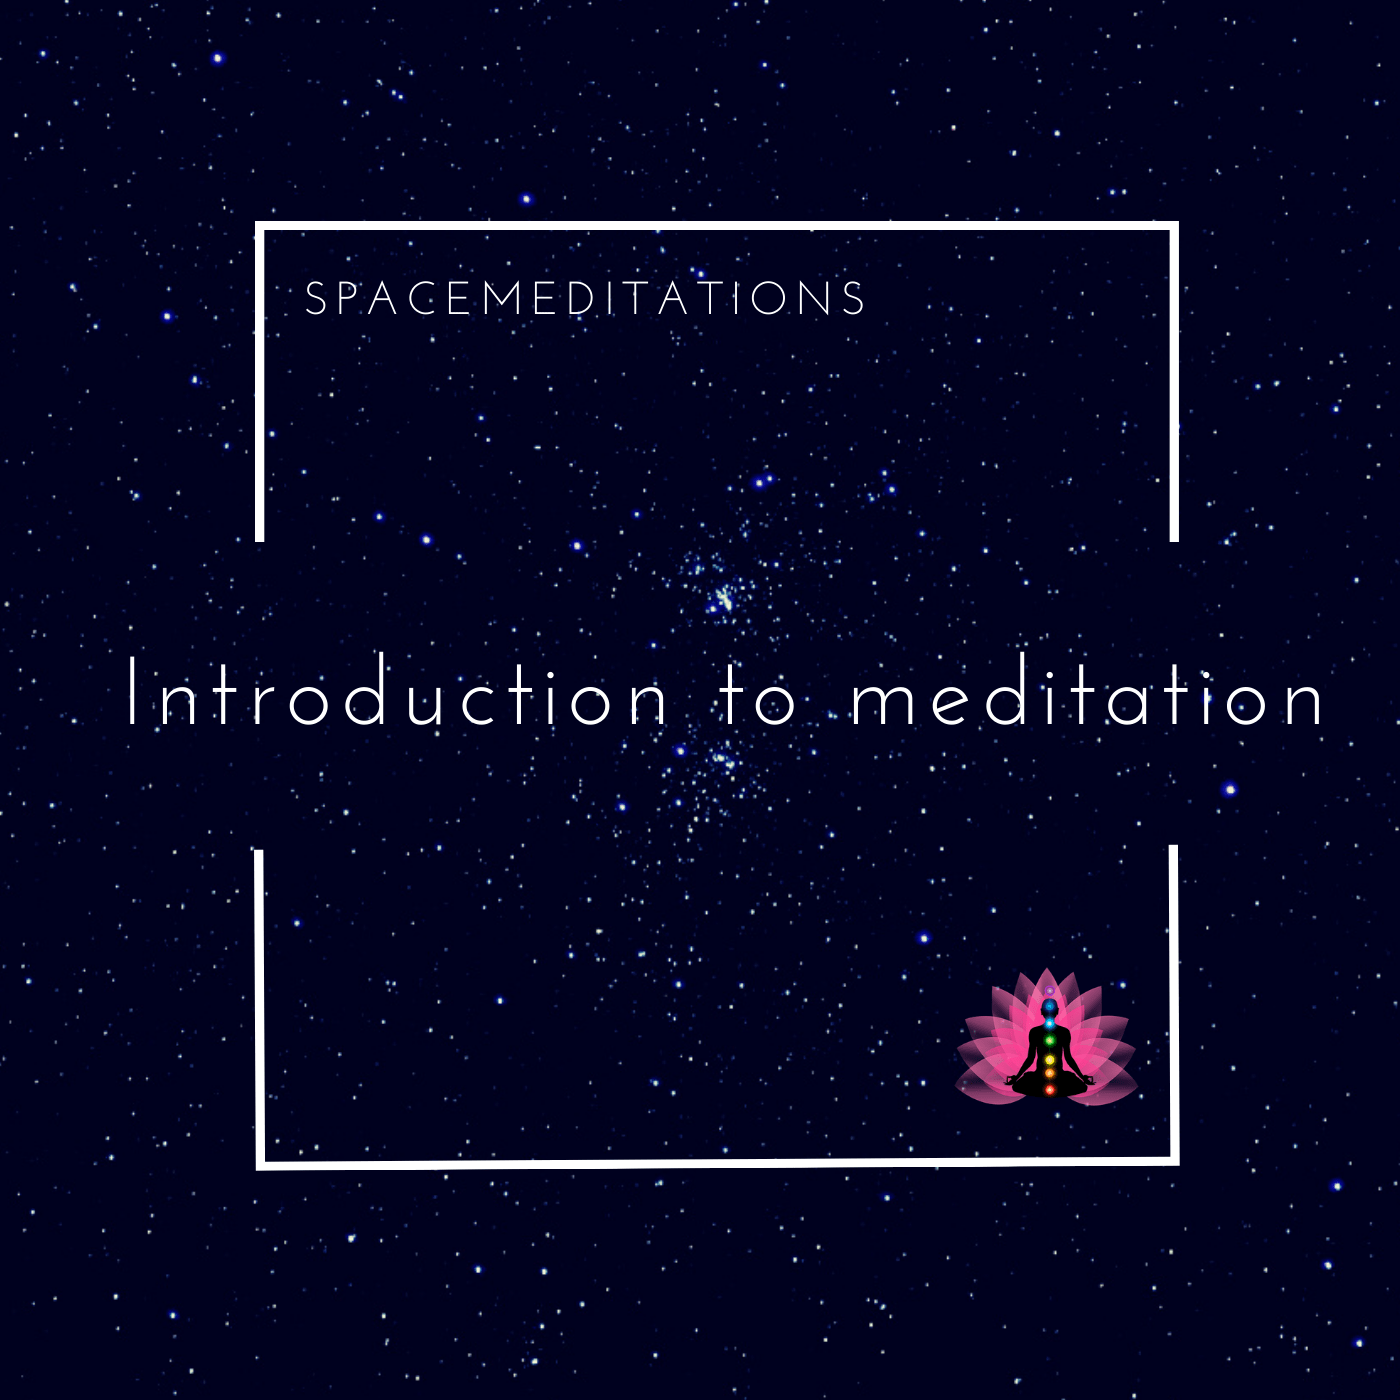 Introduction to meditation. Spacemeditations